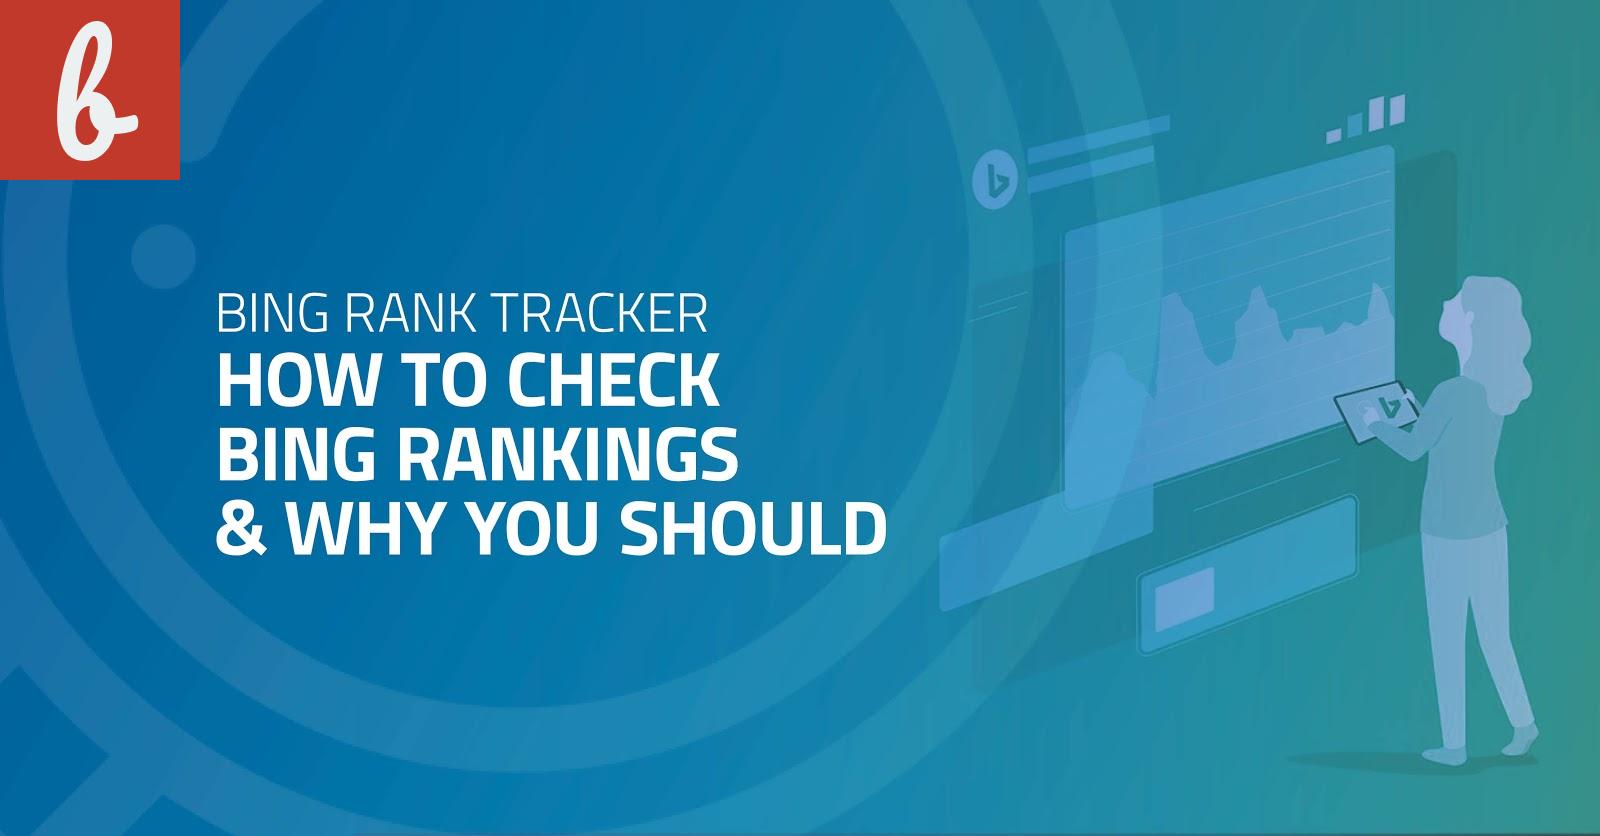 The Benefits of Tracking Your Bing Rankings
